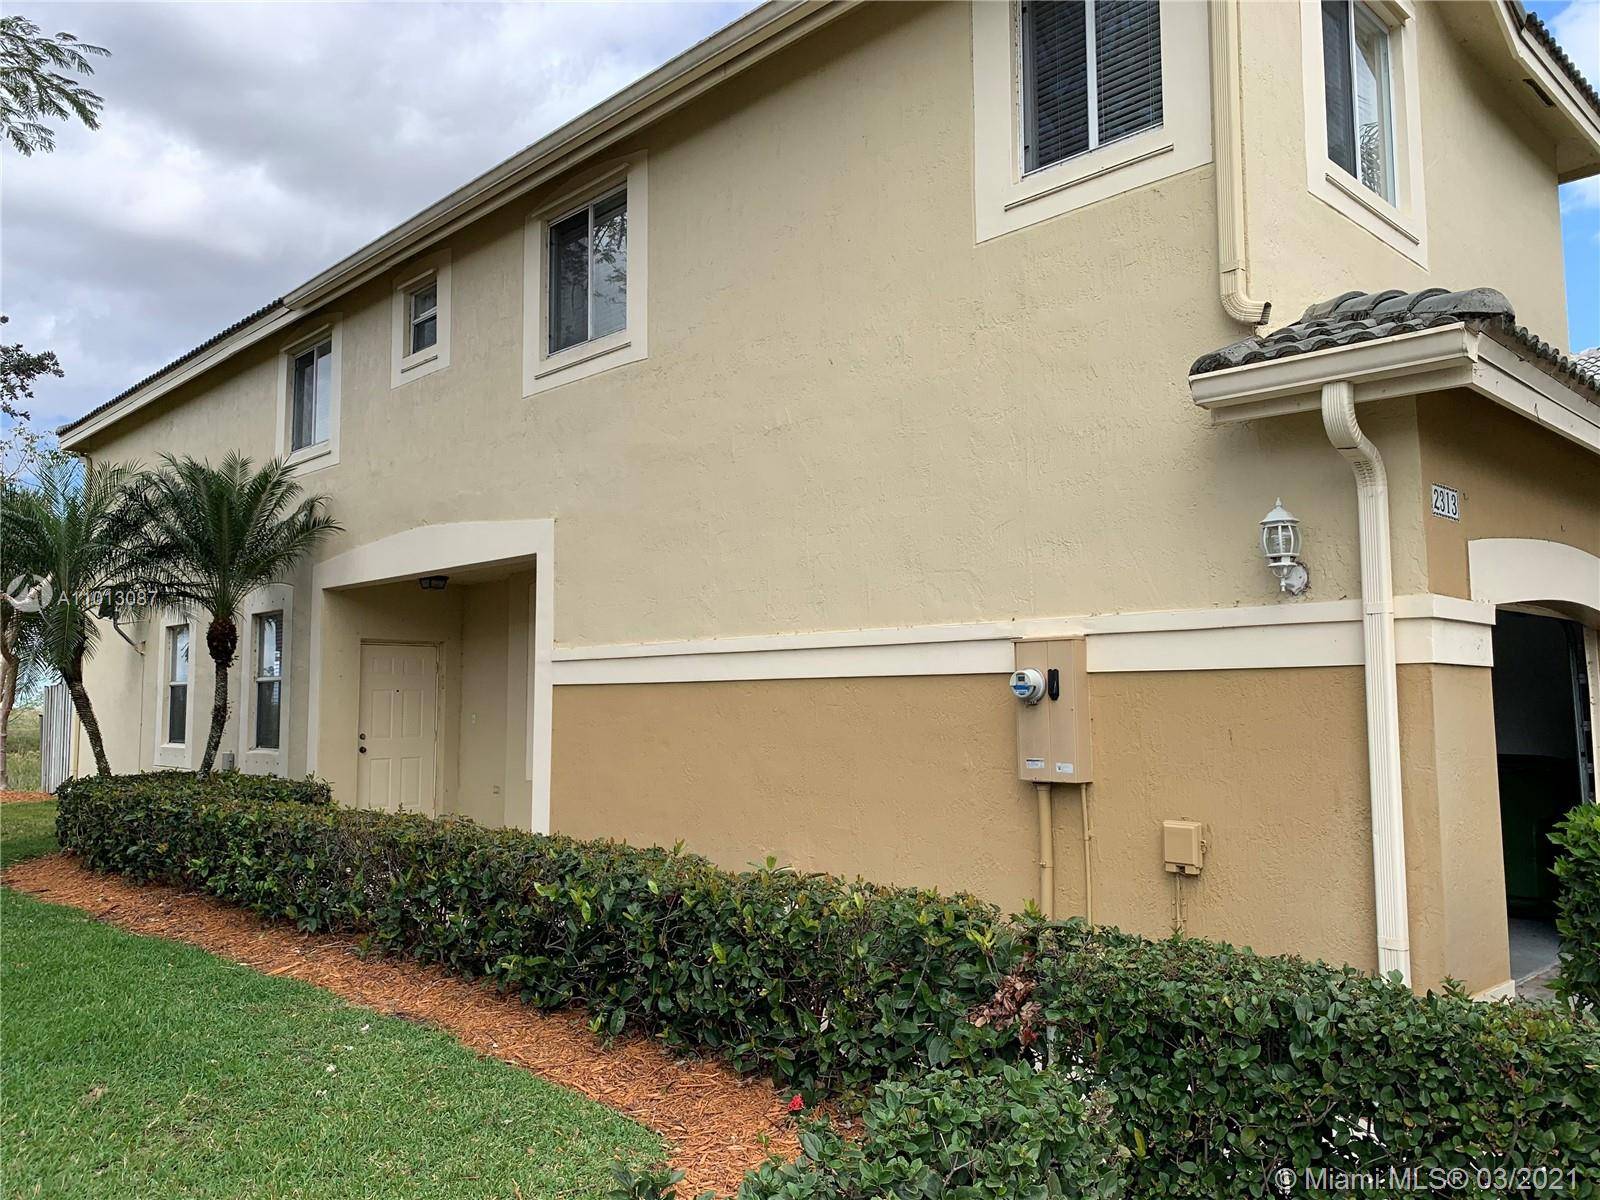 Come and see this cozy townhouse located at San Mateo, a Weston gated community, Excellent school zone also in a very well kept neighborhood.